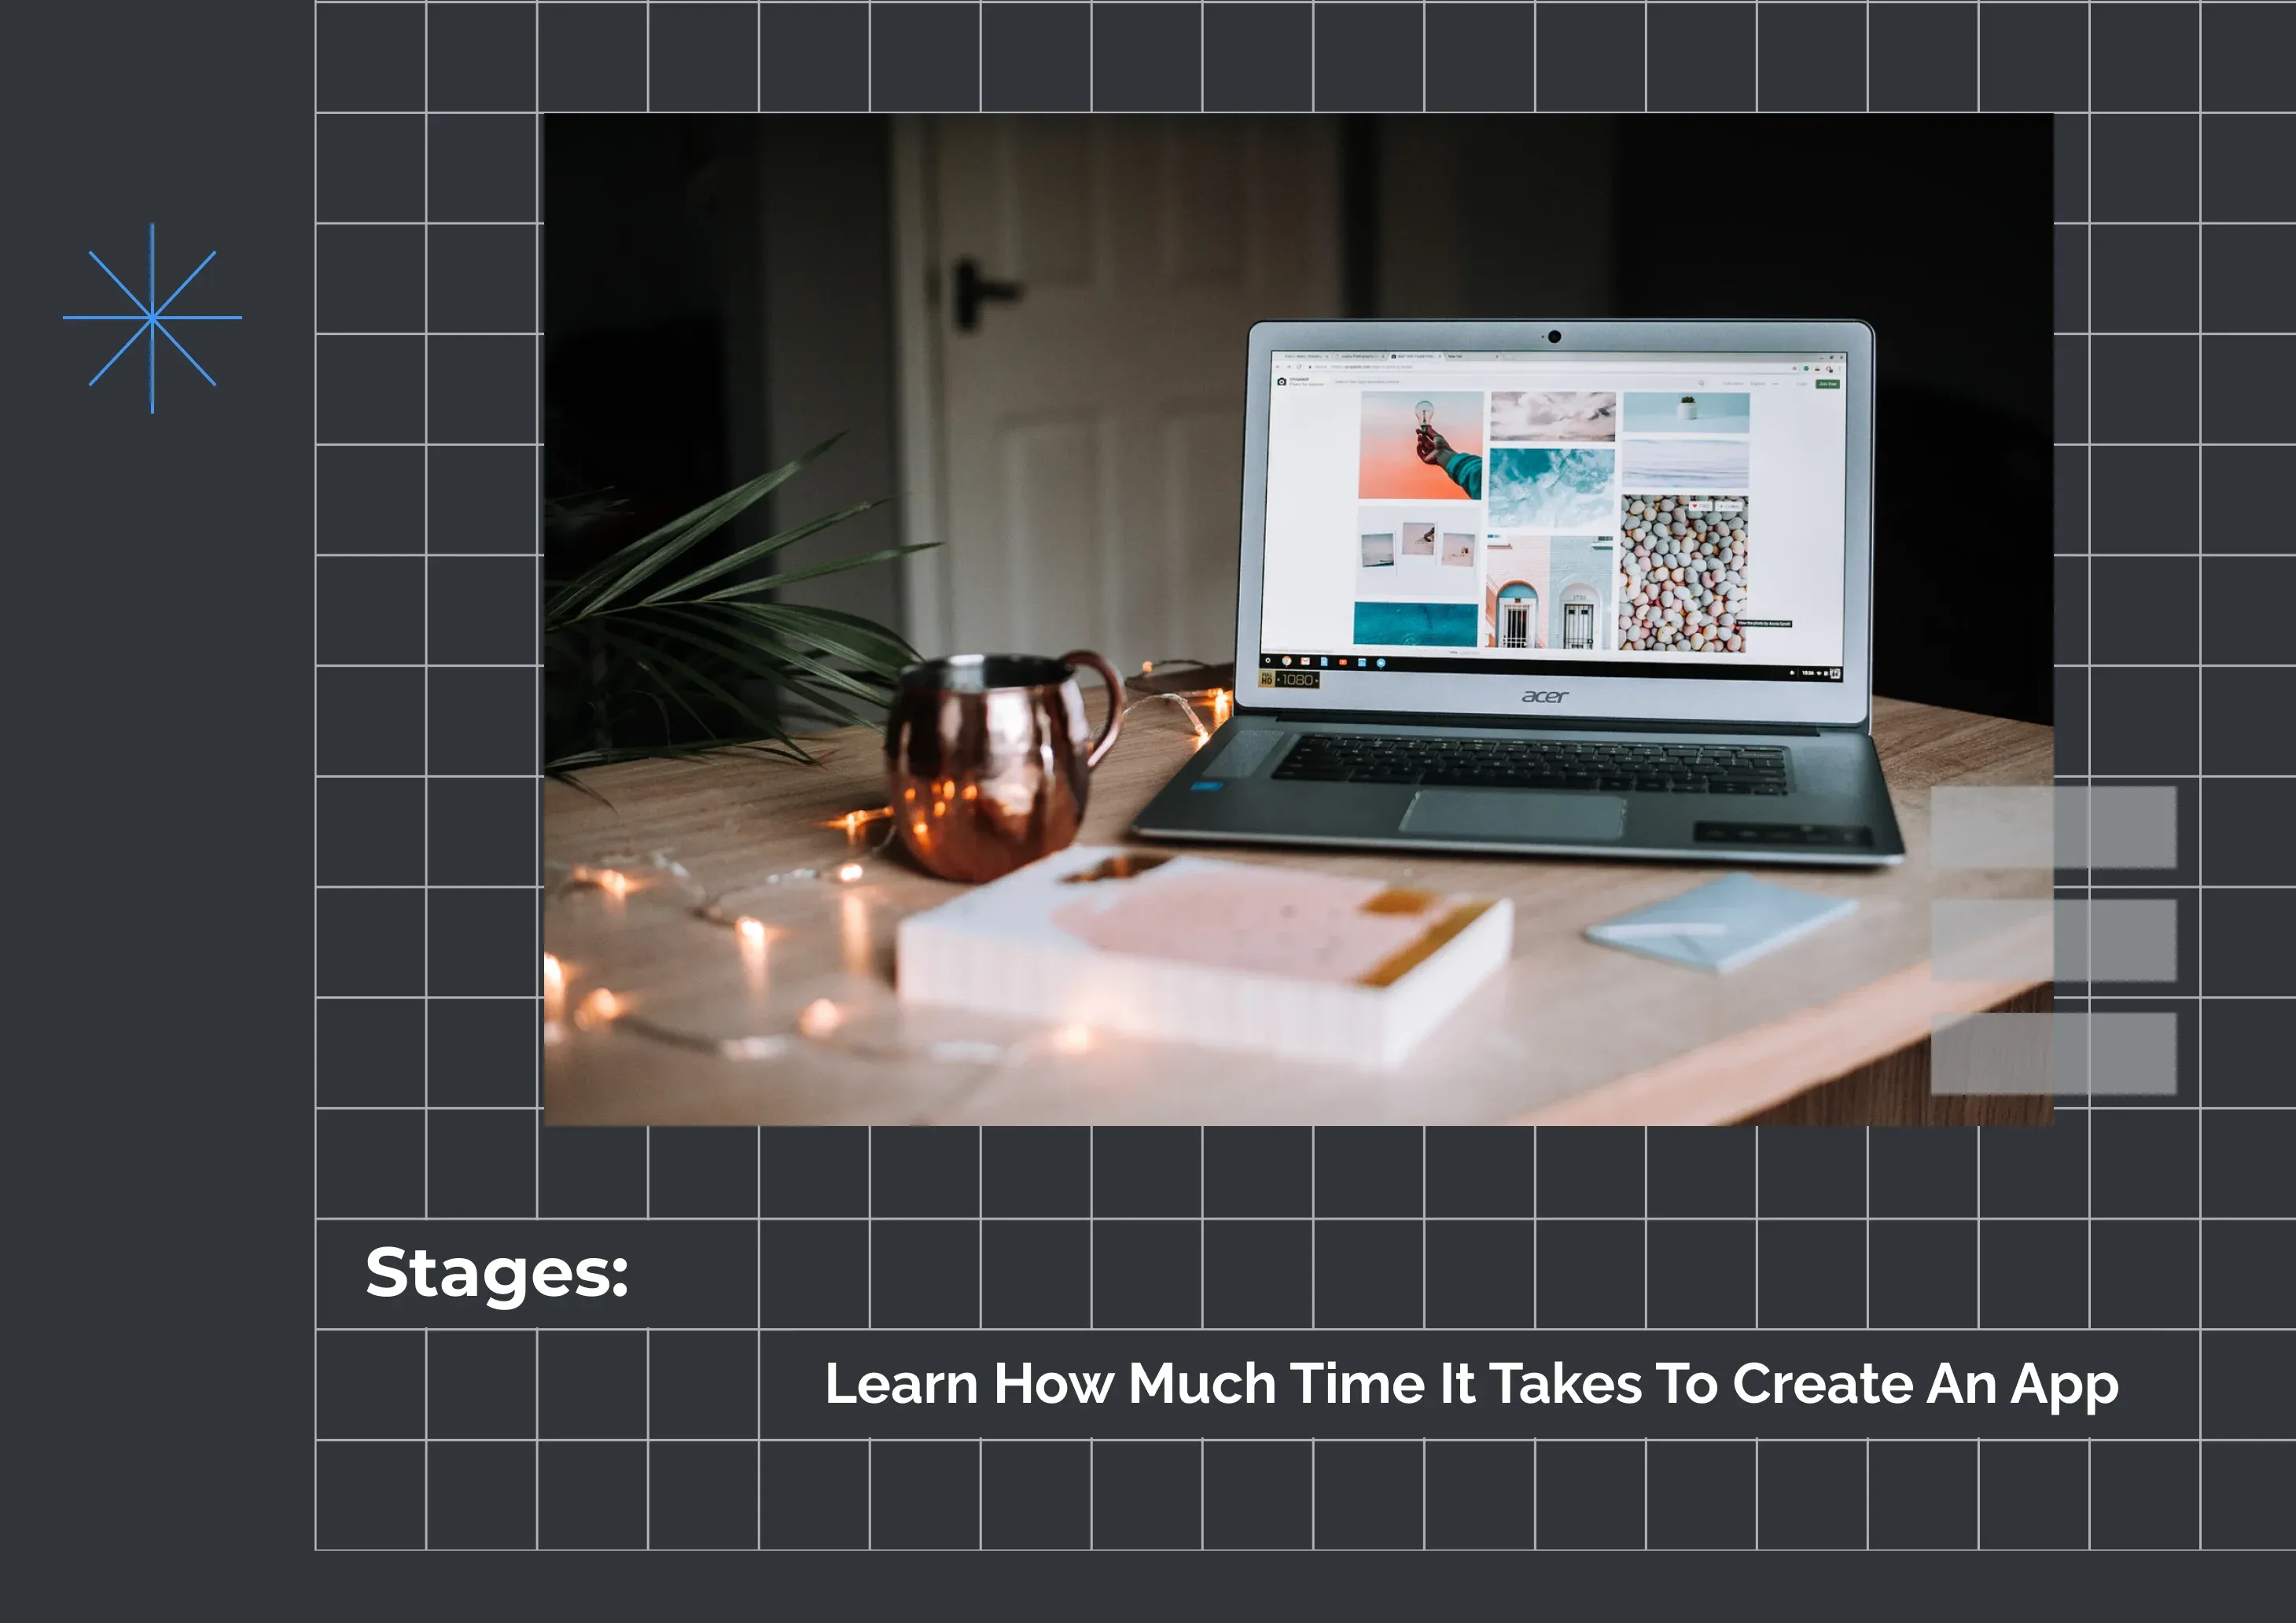 Stages: Learn How Much Time It Takes To Create An App